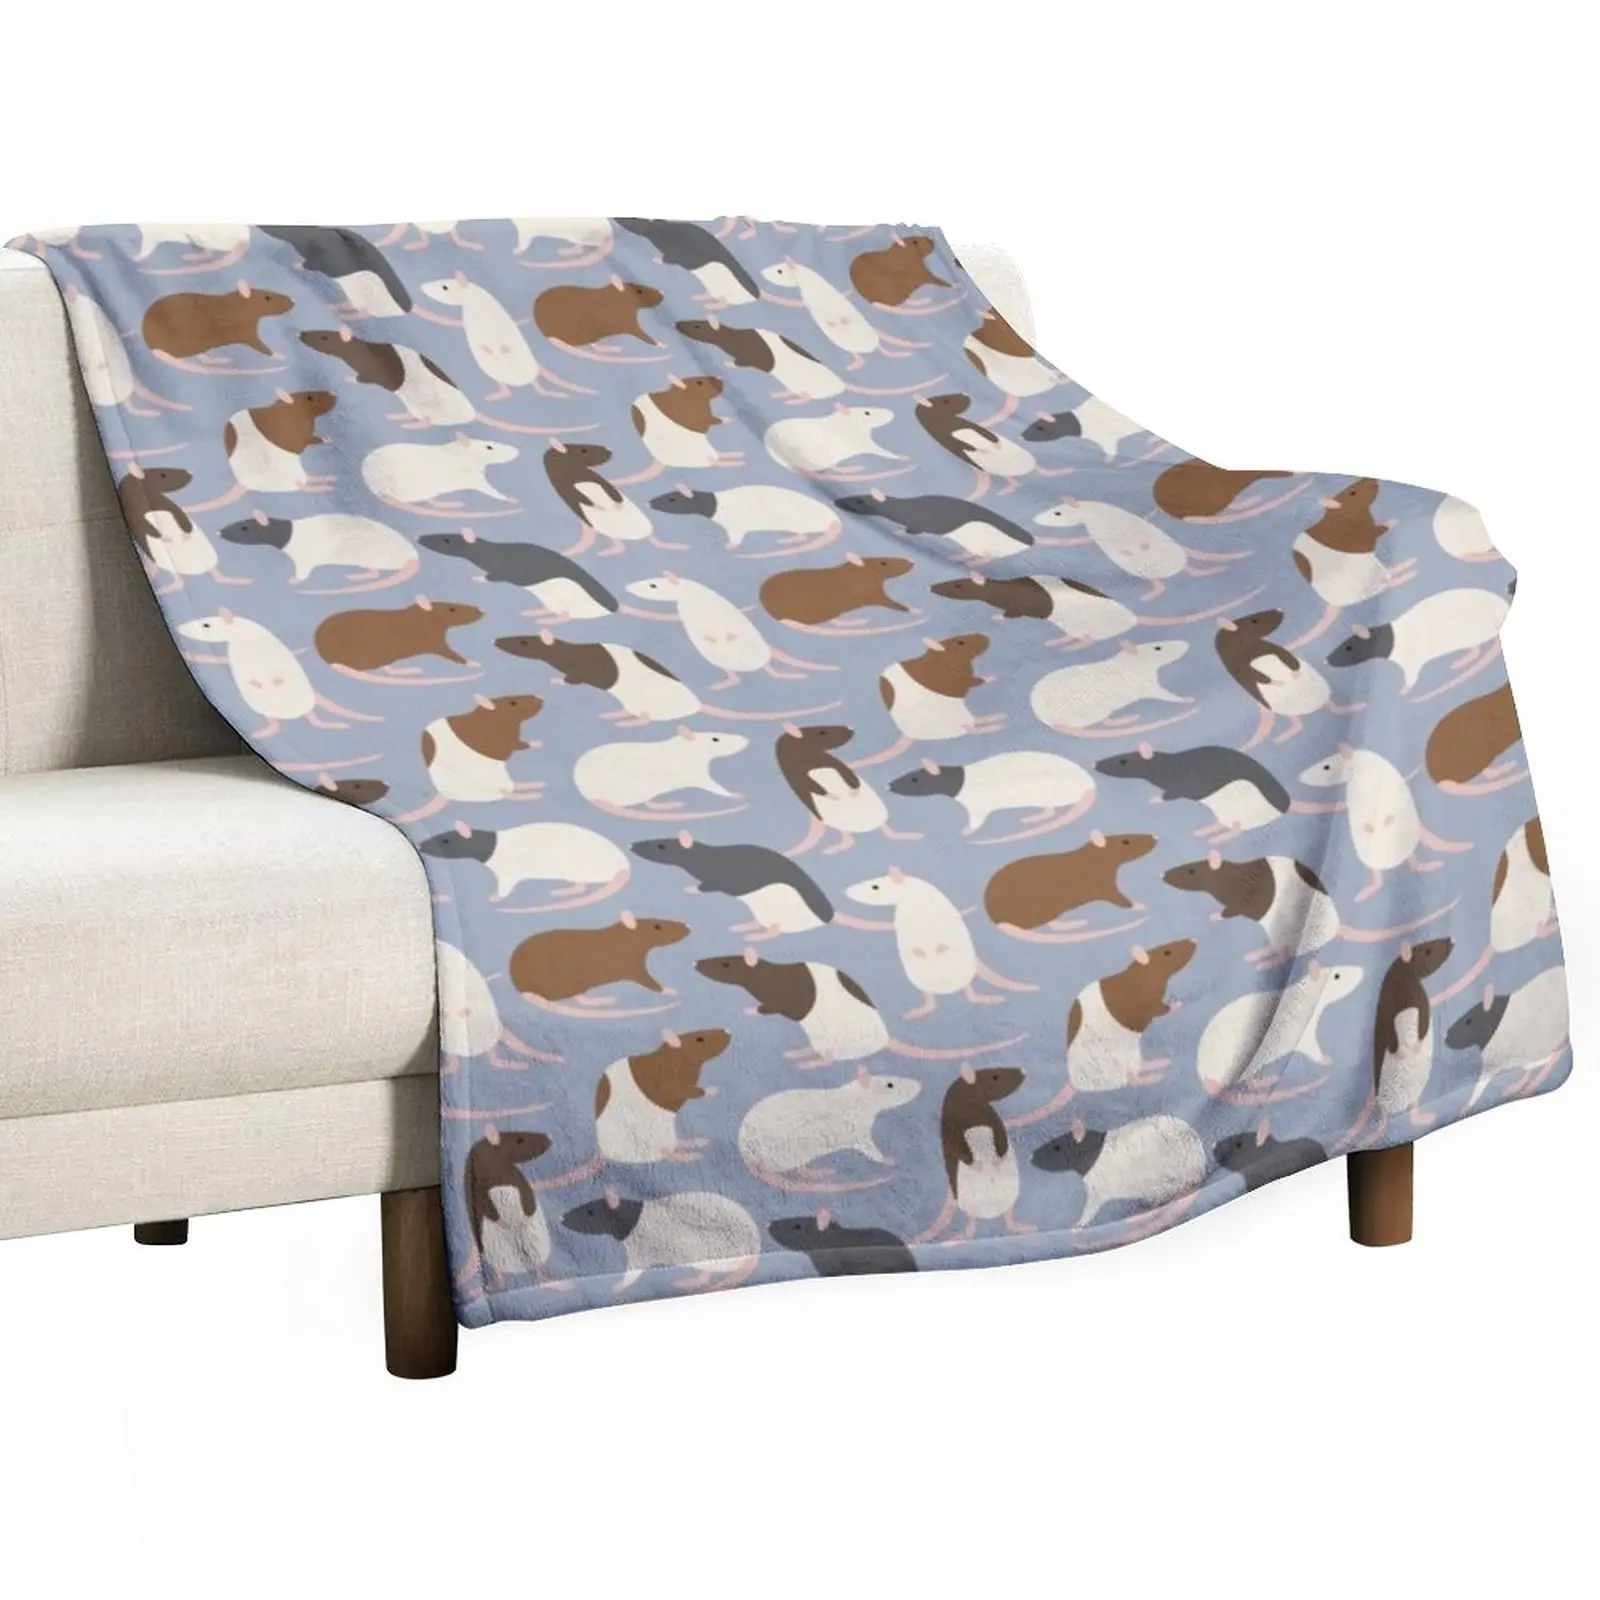 

New Rats Pattern Throw Blanket Blanket For Decorative Sofa Heavy Blanket Winter bed blankets Fluffy Blankets Large